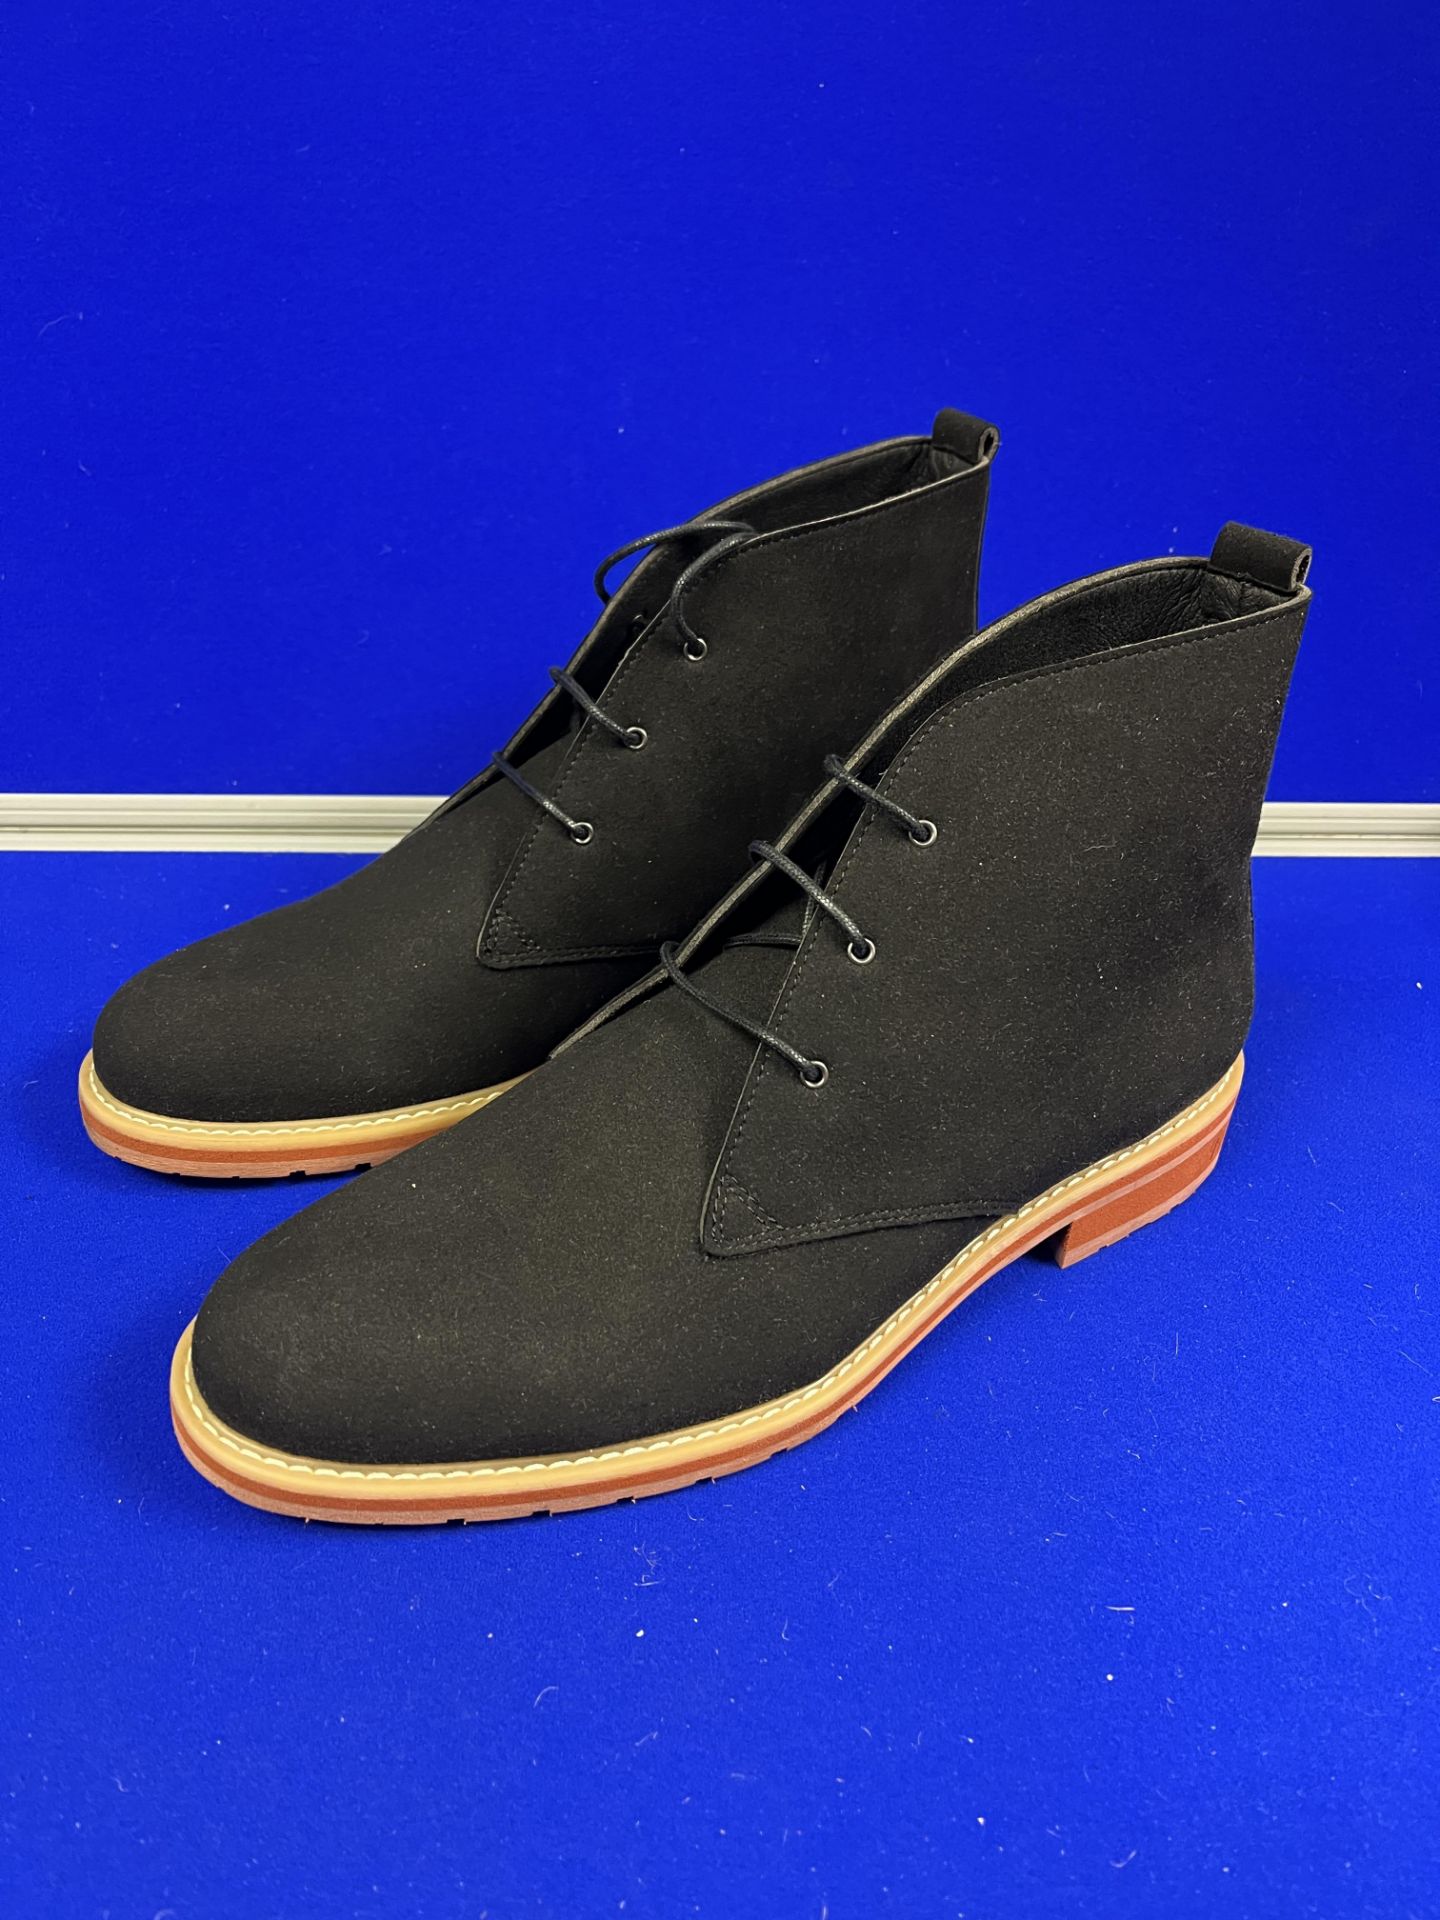 Good Guys Black Suede High Top Chelsea Boots - Size UK 11